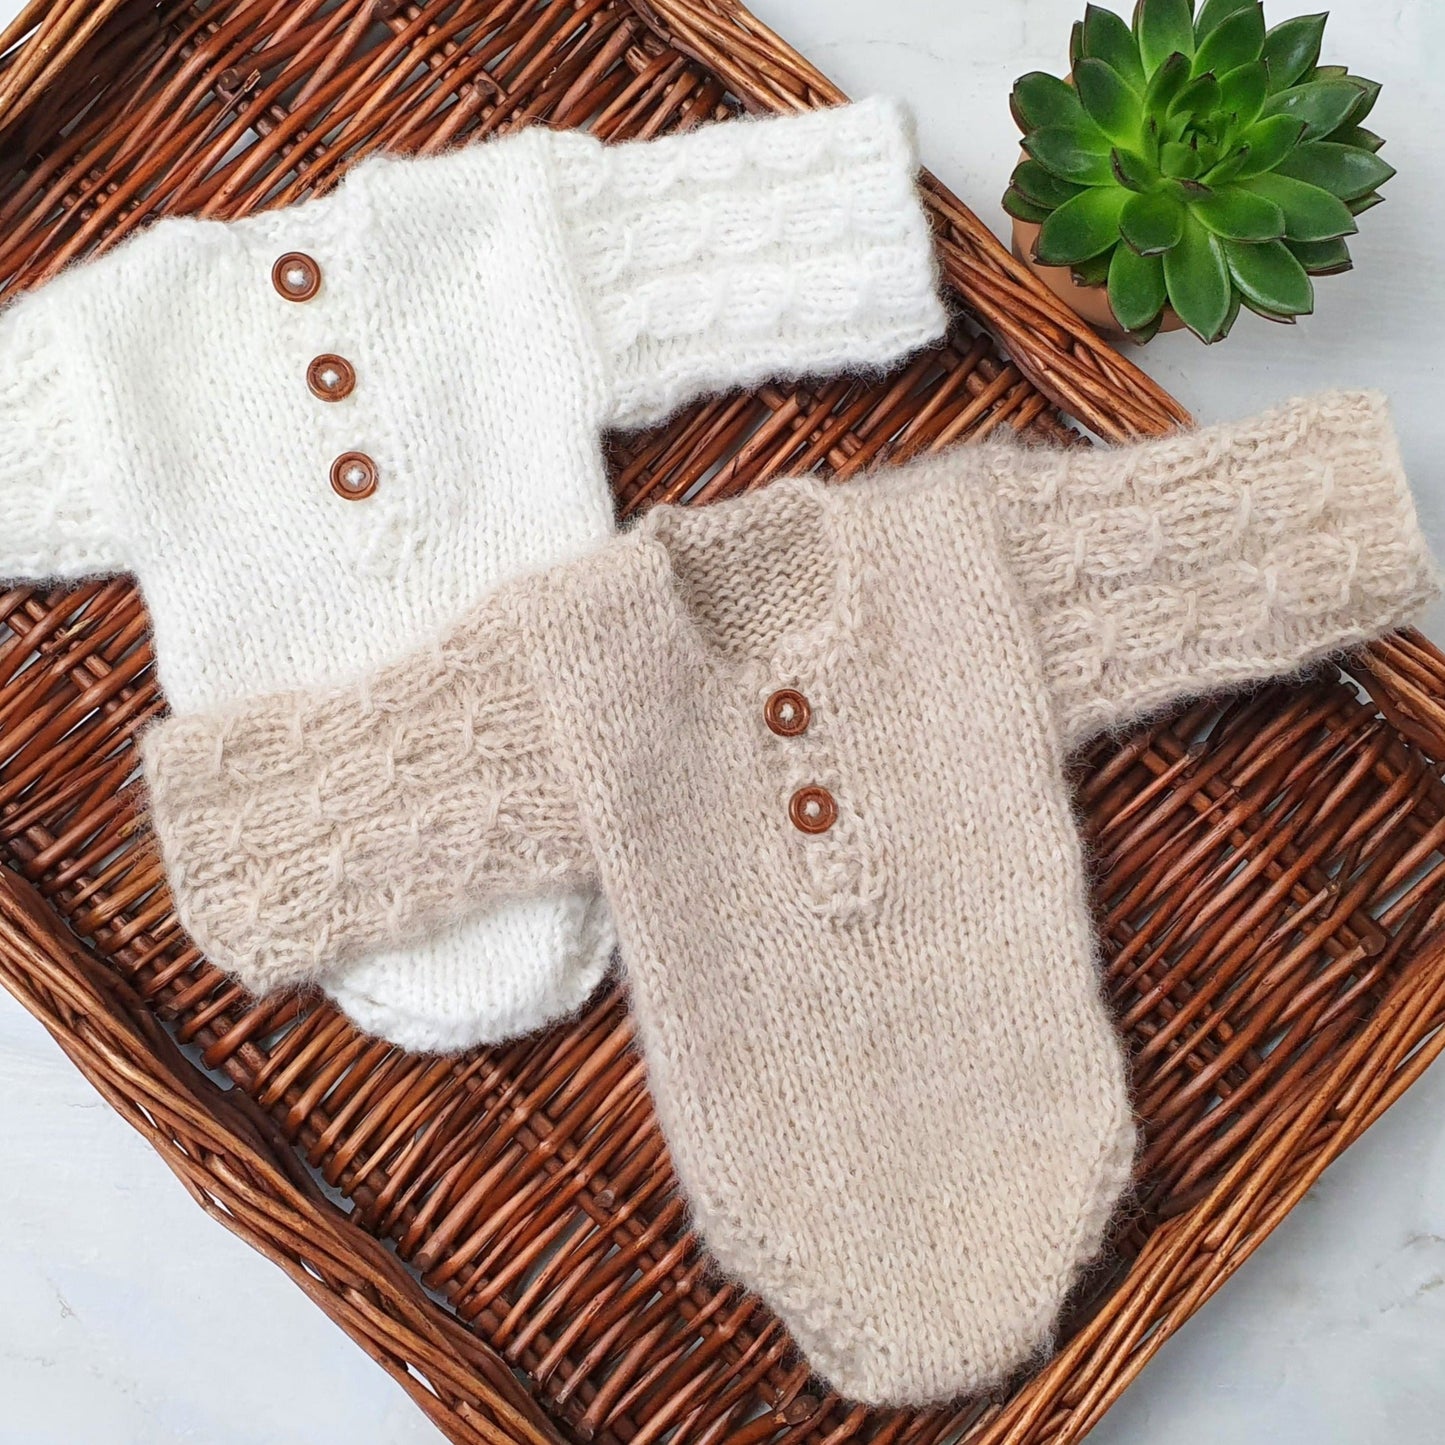 handknit newborn baby romper with cable or lace sleeves